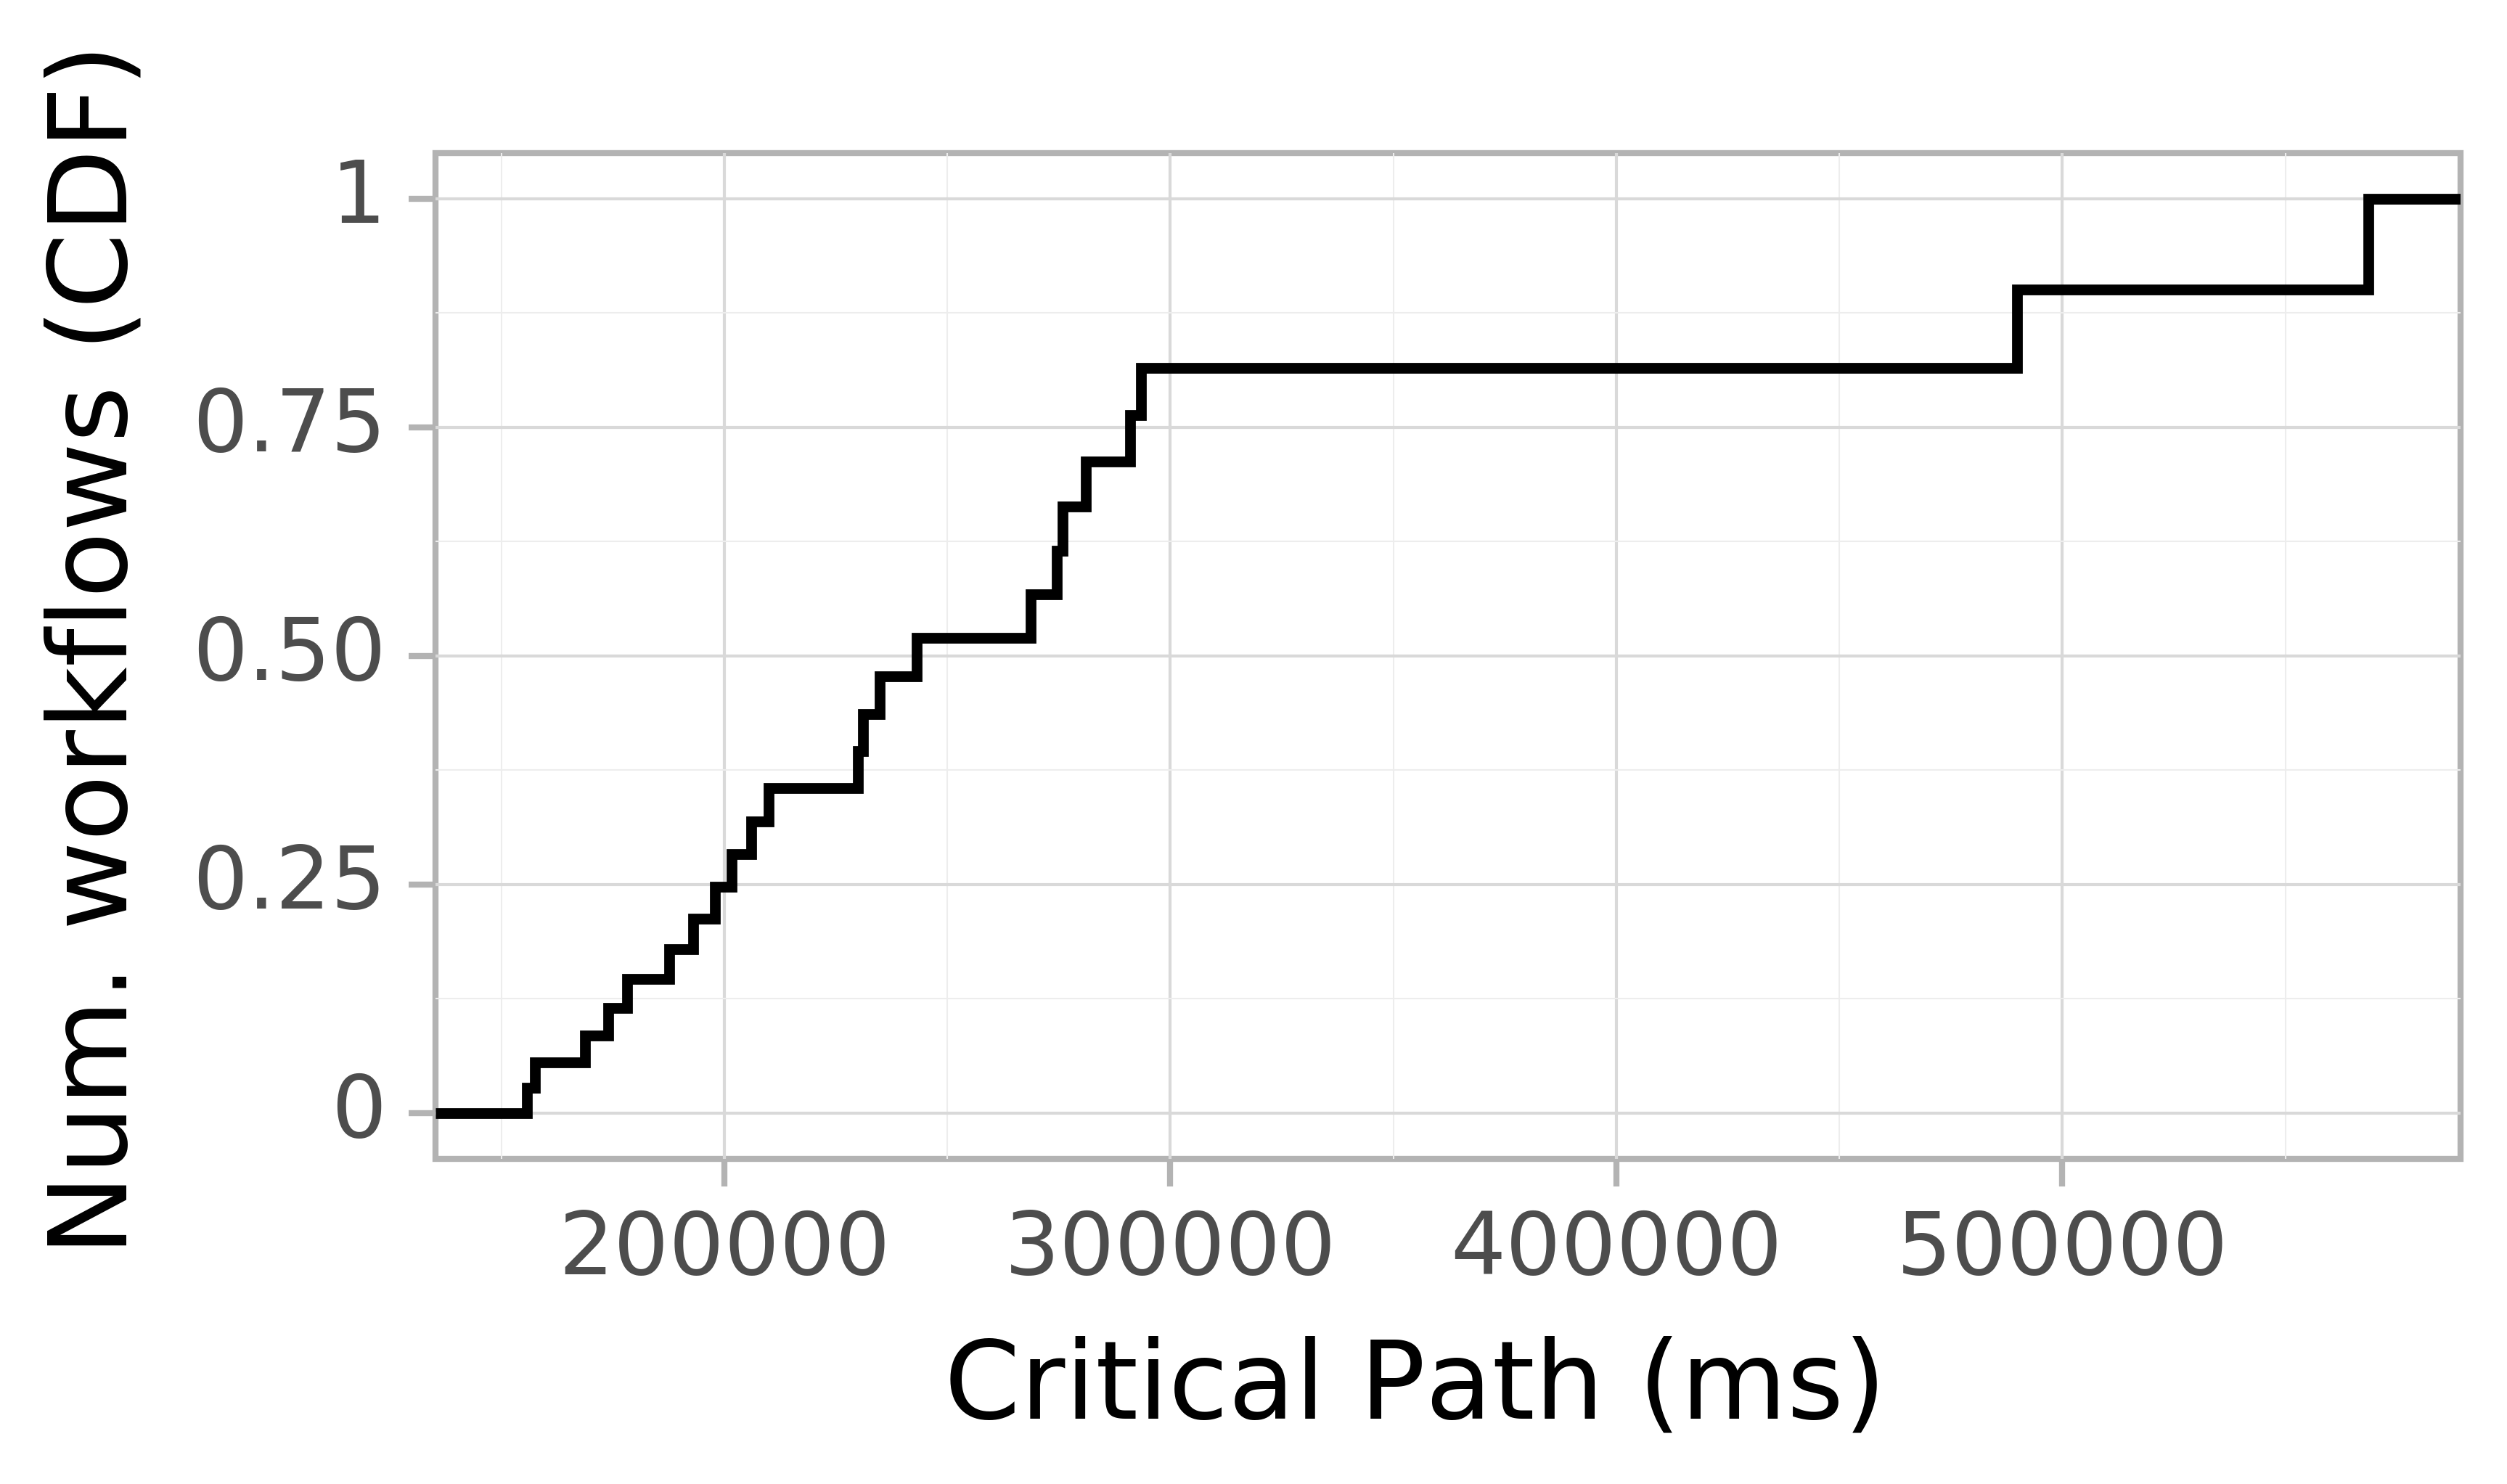 Job runtime CDF graph for the askalon-new_ee62 trace.